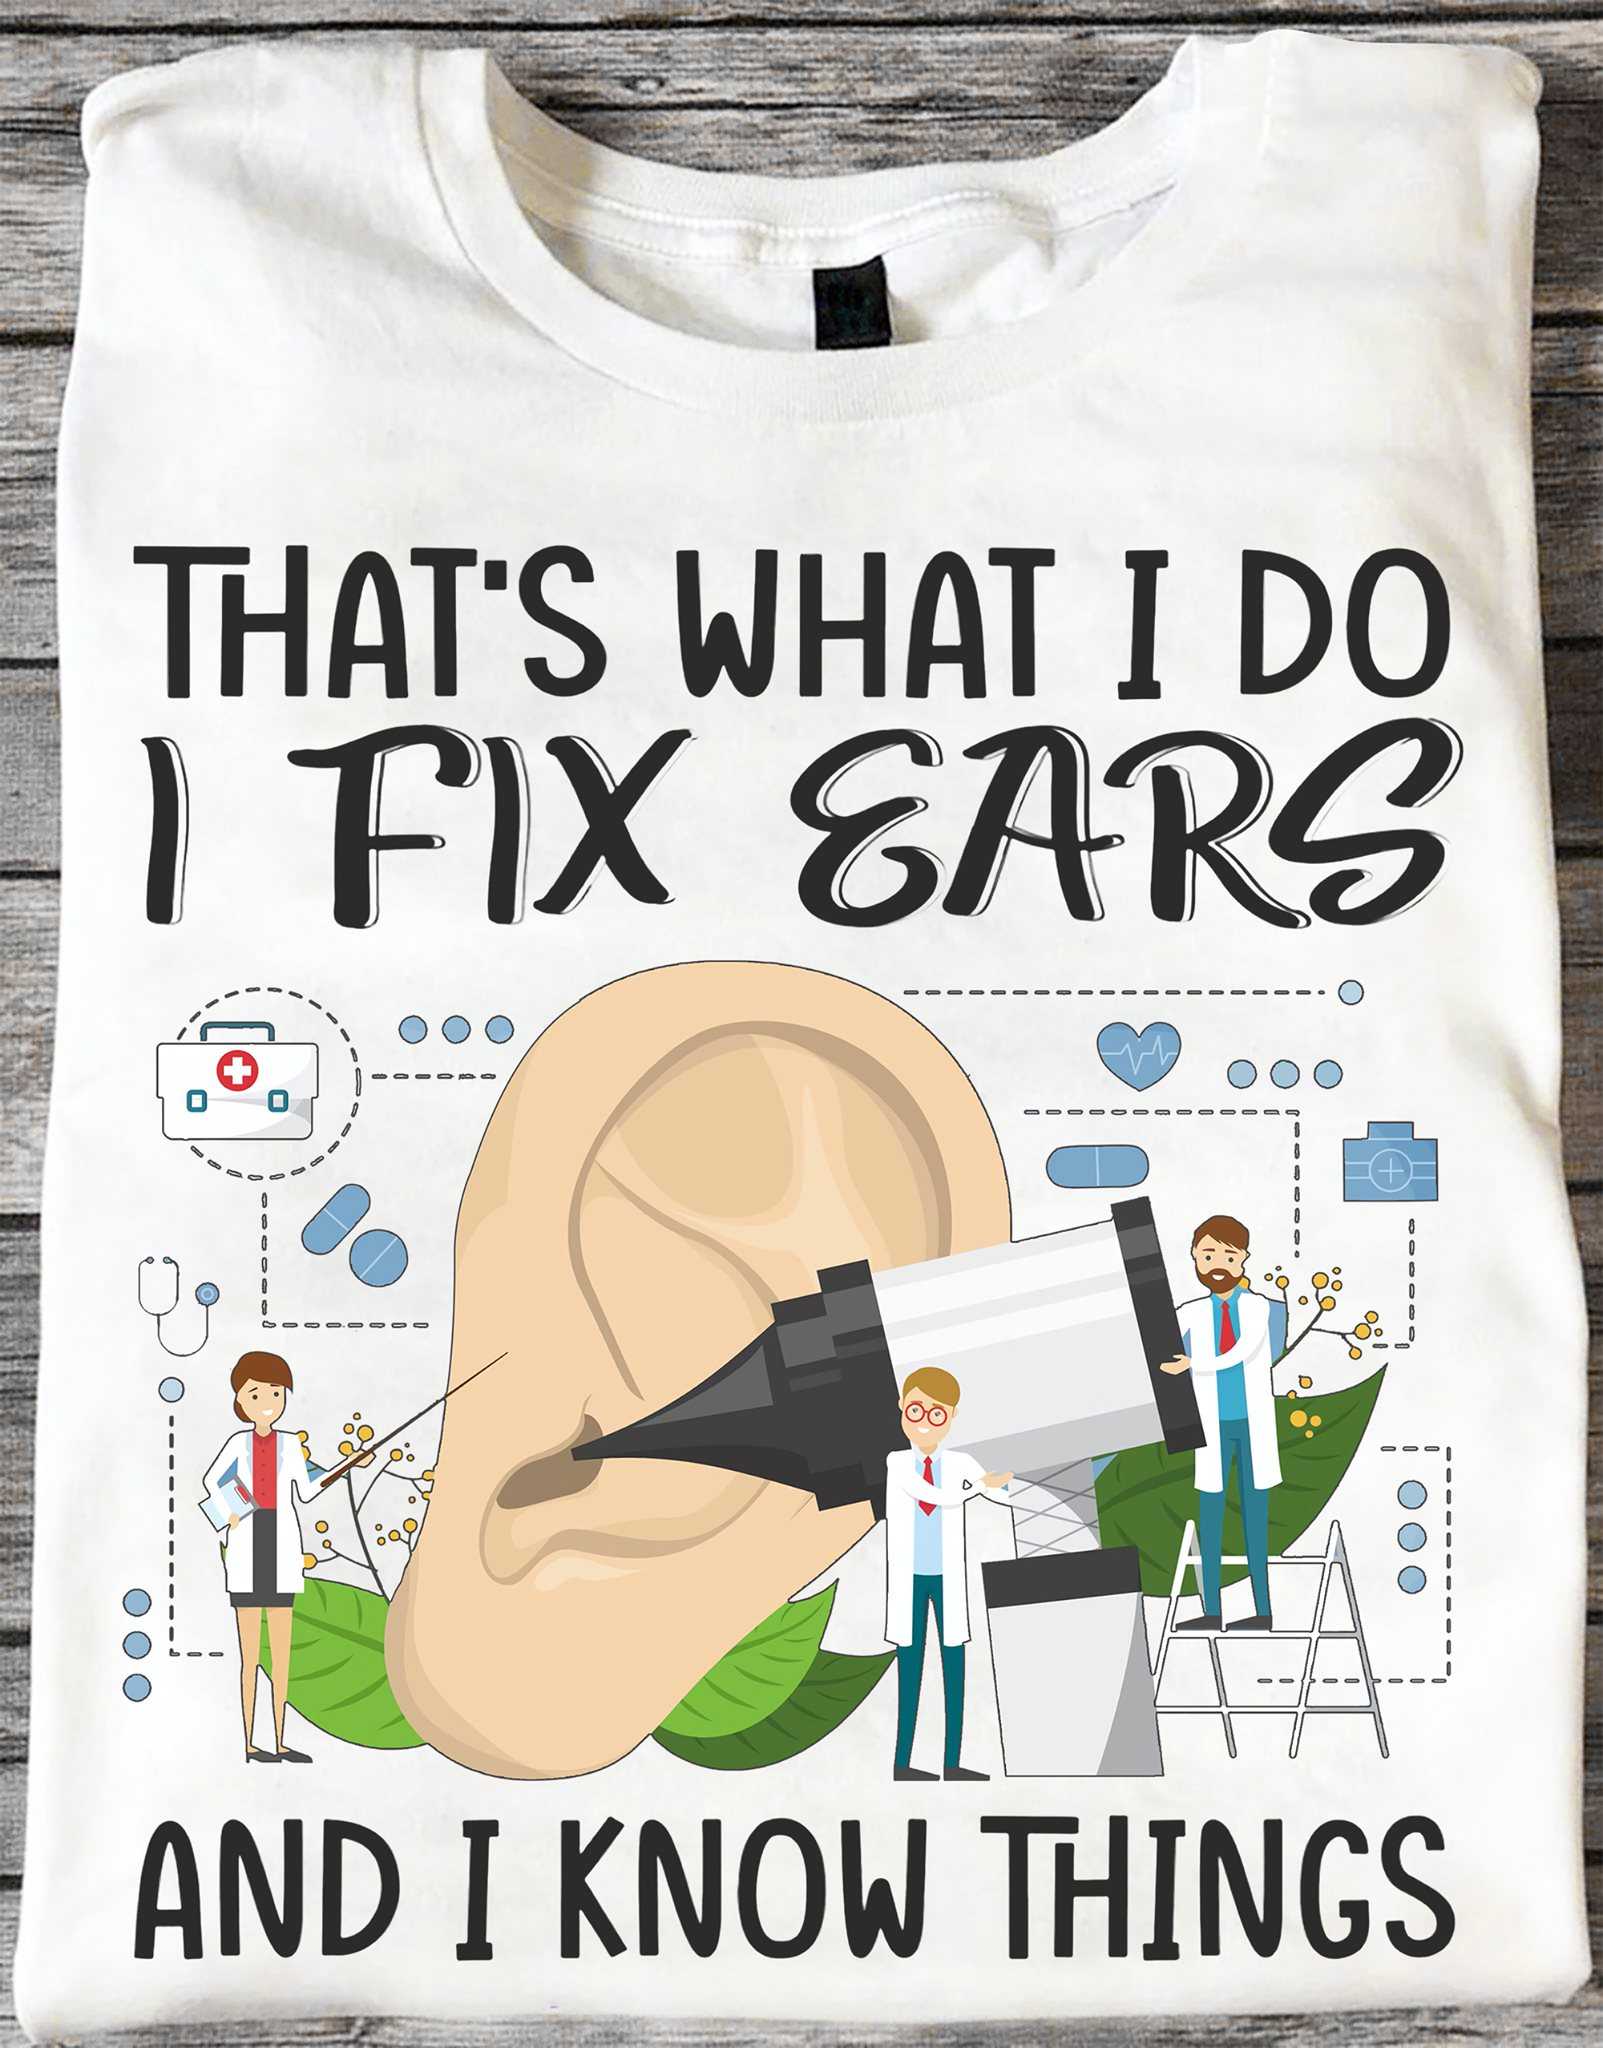 That's what I do I fix ears and I know things - Fixing ear doctors, doctor the job